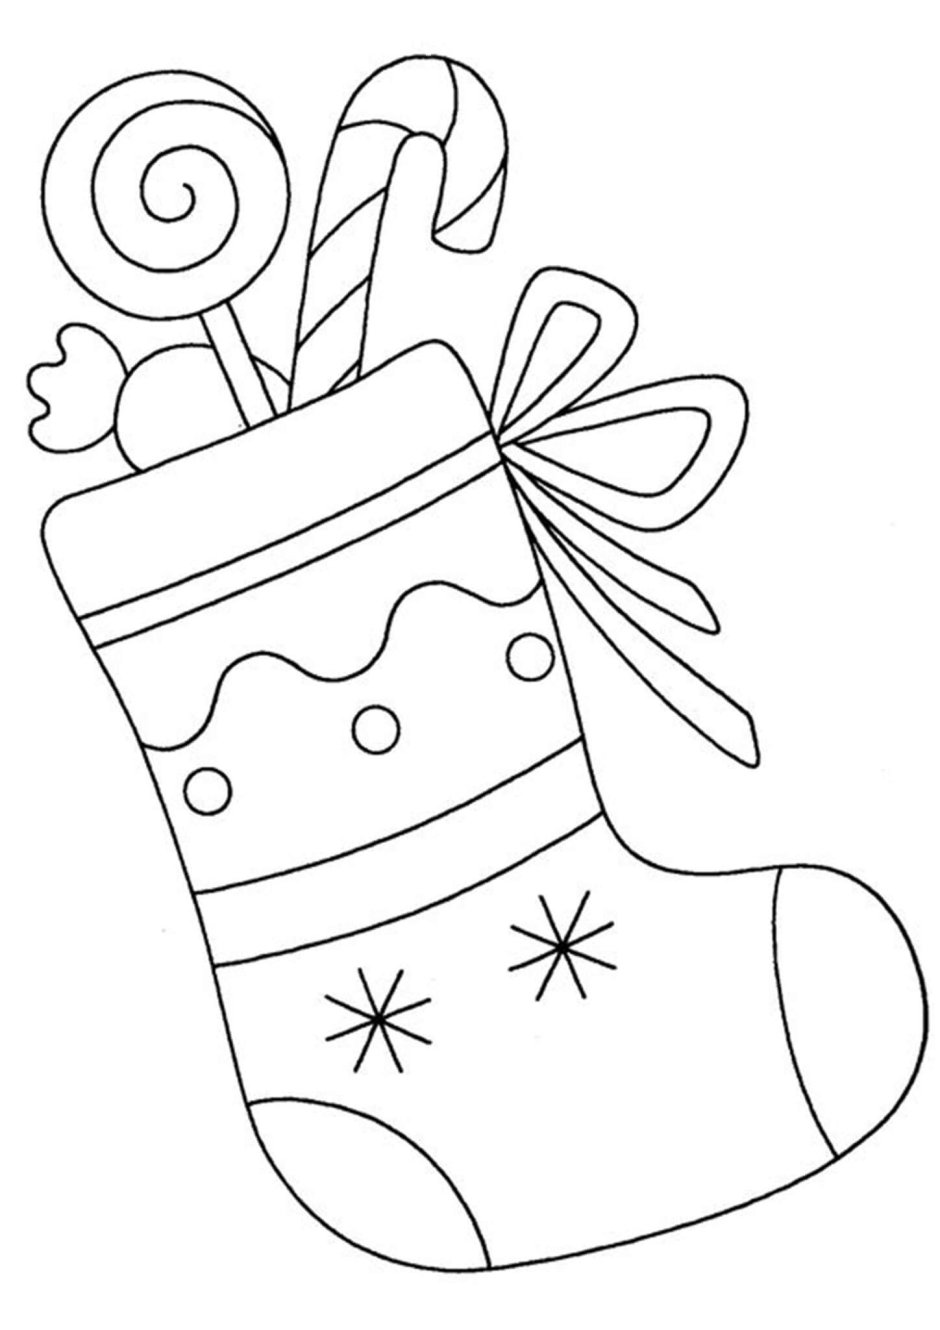 Coloring Pages Christmas stockings